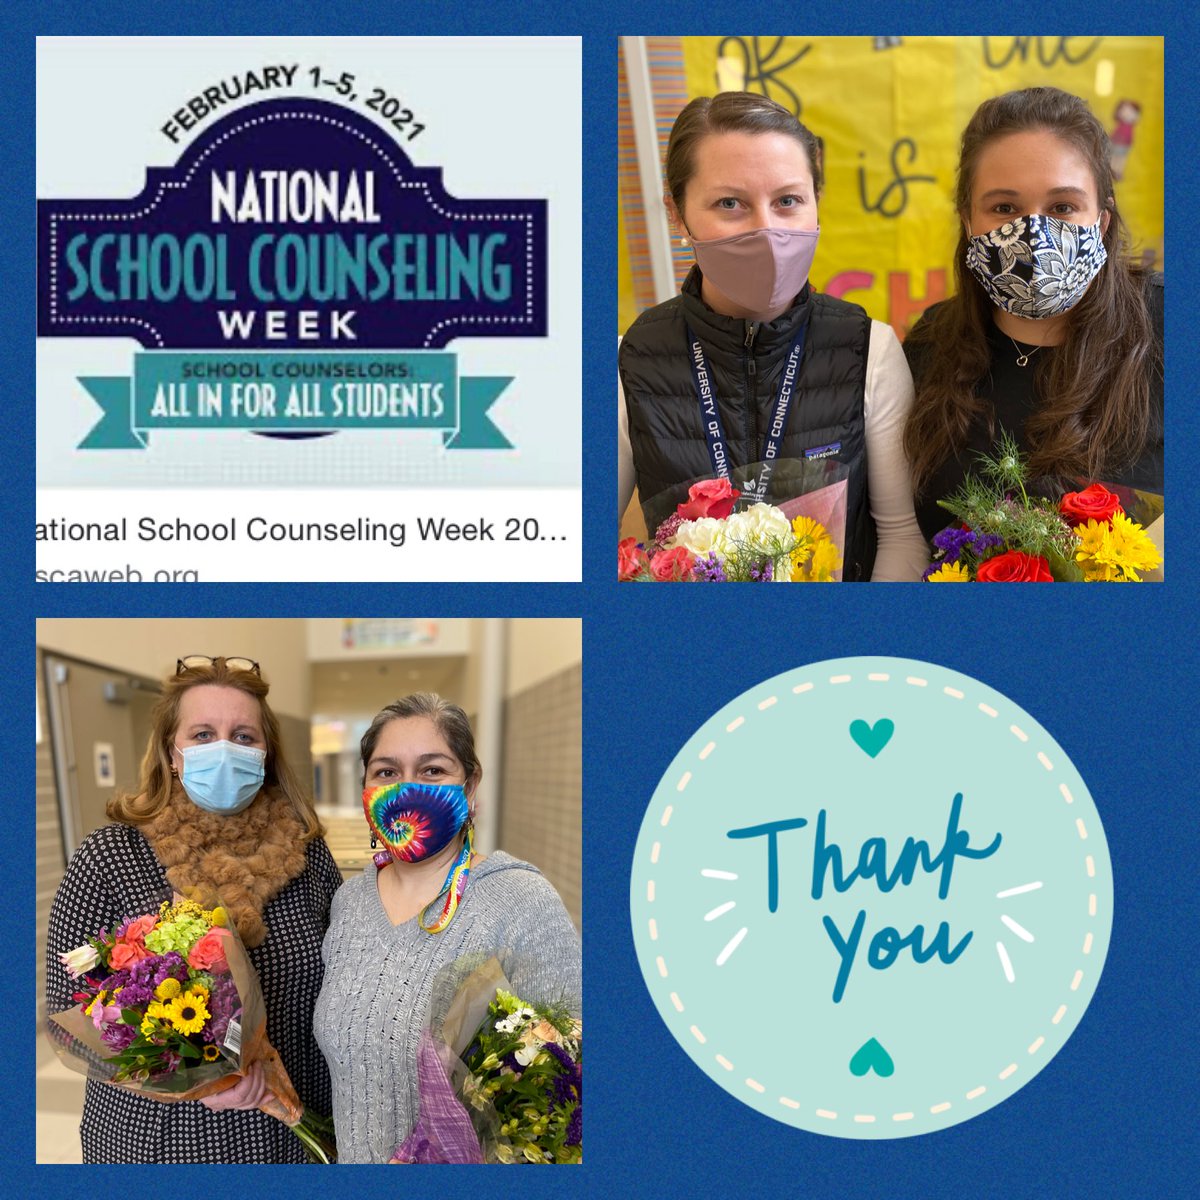 We 💙our School Counselors! Mrs. Cruz-Reis, Mrs. Clermont, Ms Kaizer and Ms Tamburro and Mrs Nussbaum (not pictured) help all students succeed! Thanks for your thoughtful program planning, guidance, and heartfelt caring and encouragement @HartfordPromise @Hartford_Public 
#NSCW21